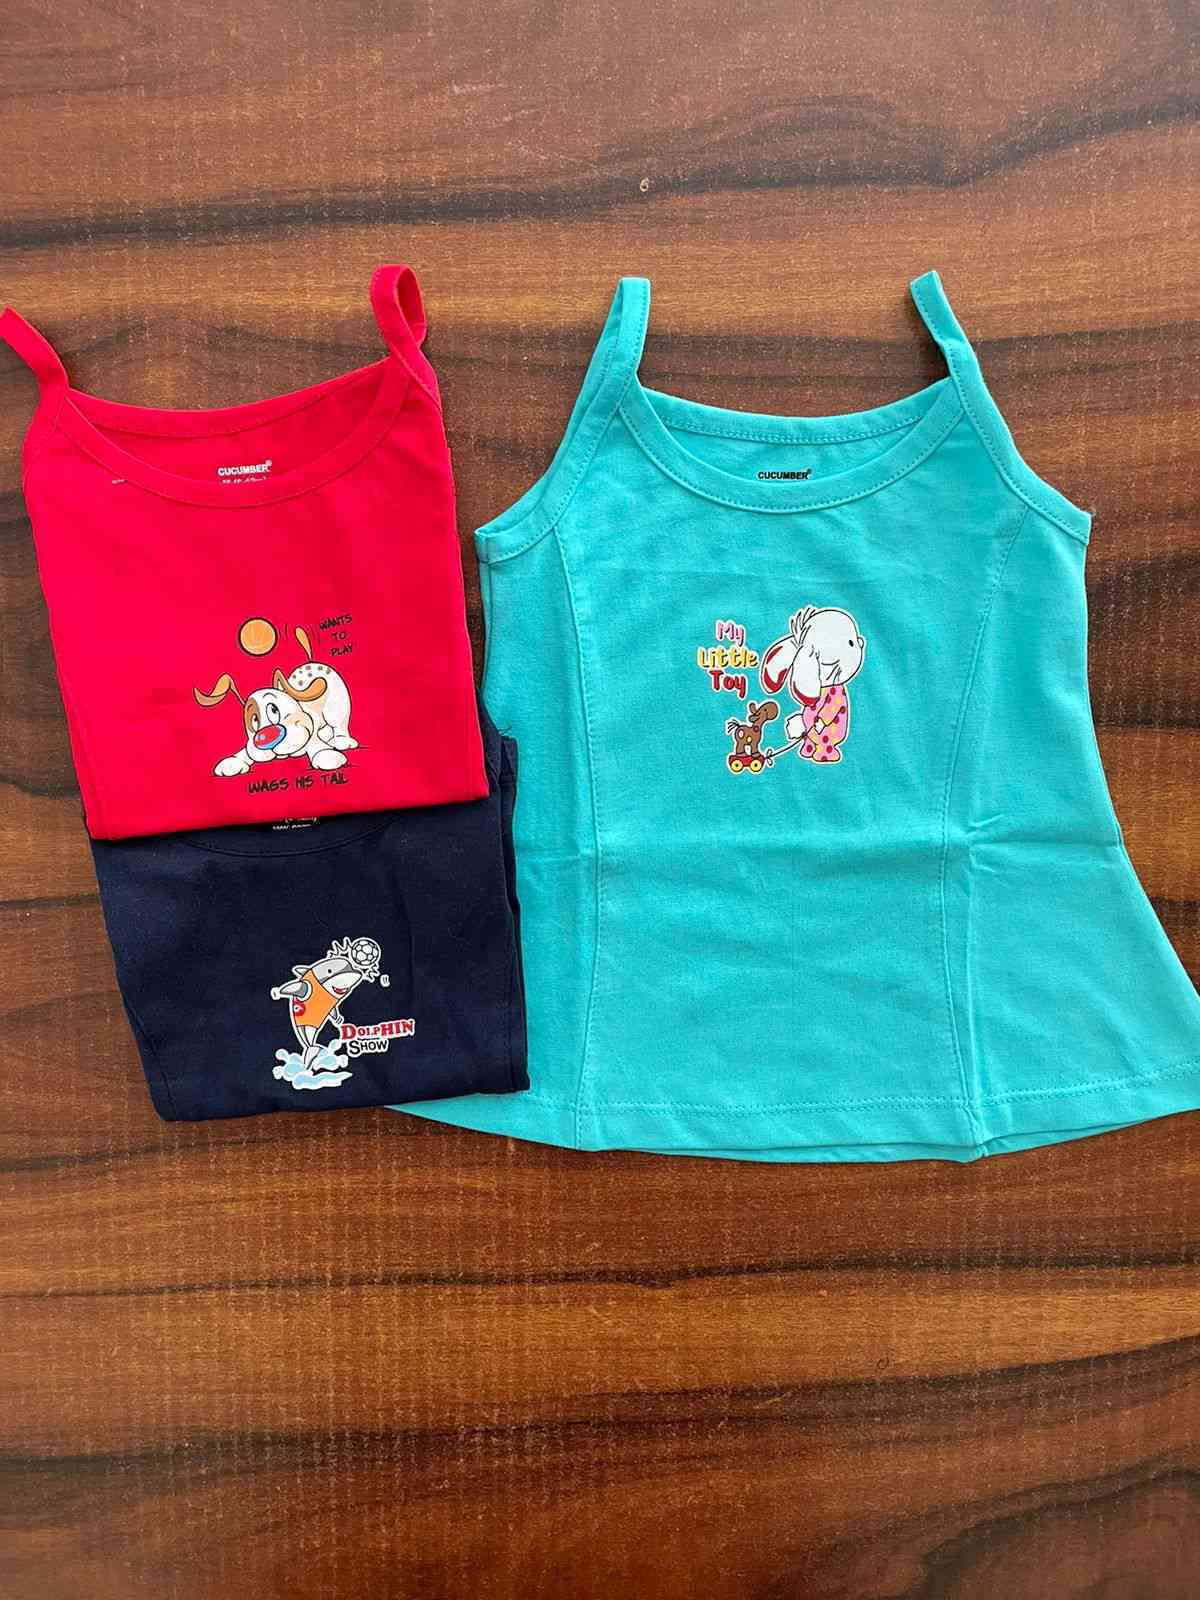 Cucumber Girls Inners  Vests  6 to 12 Months Till 18 to 24 Months   Pack of 3